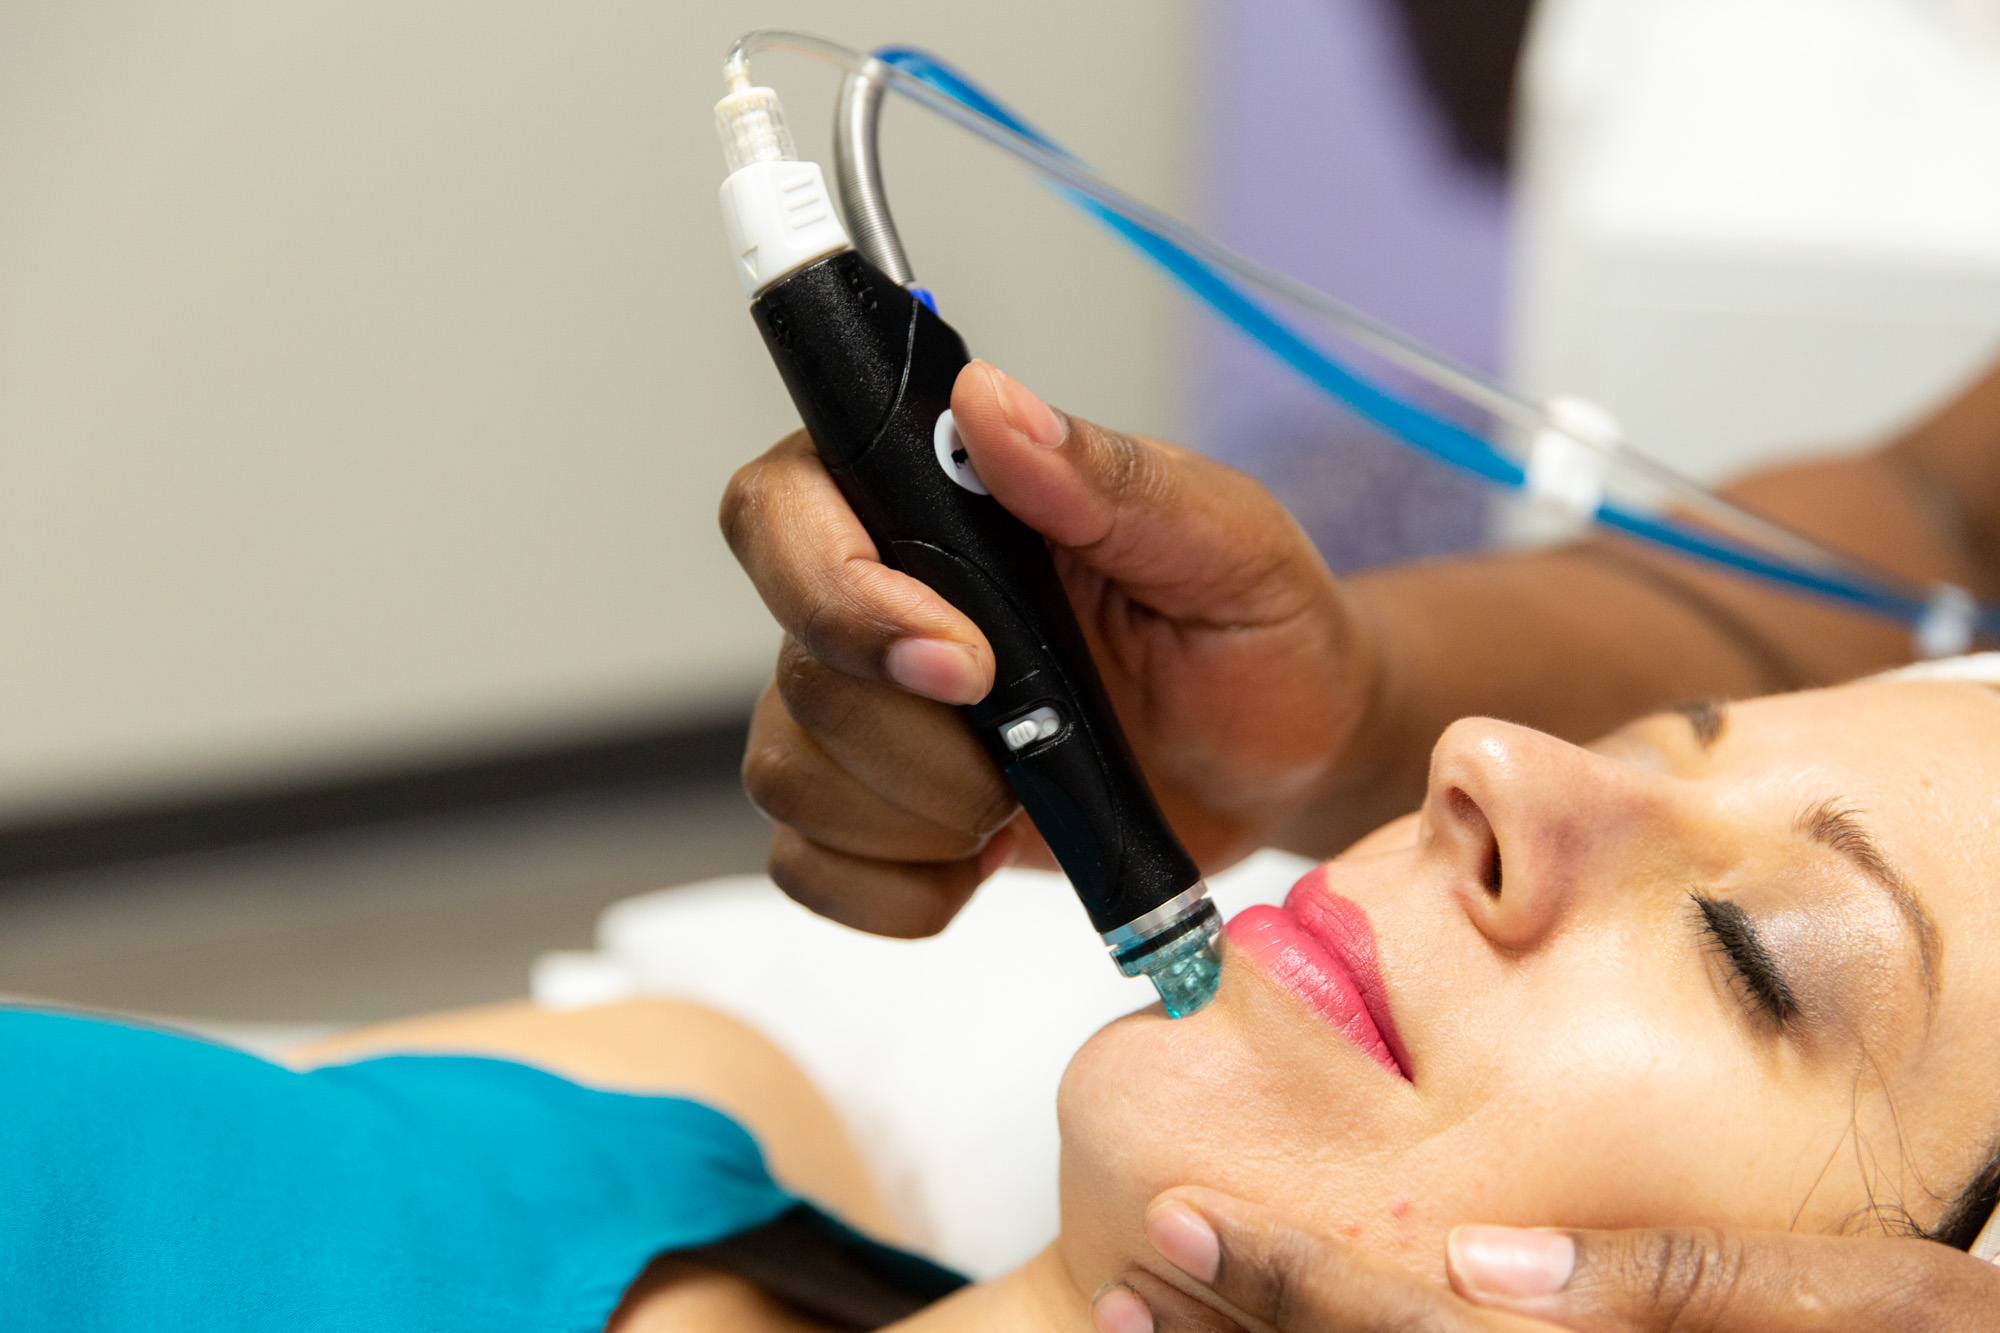 A Marcos Medical Provider applies the HydraFacial vacuum-based abrasion tool to a woman's chin during her facial. The provider is using her other hand to gently support the woman's face. The woman is laying down with her eyes closed.